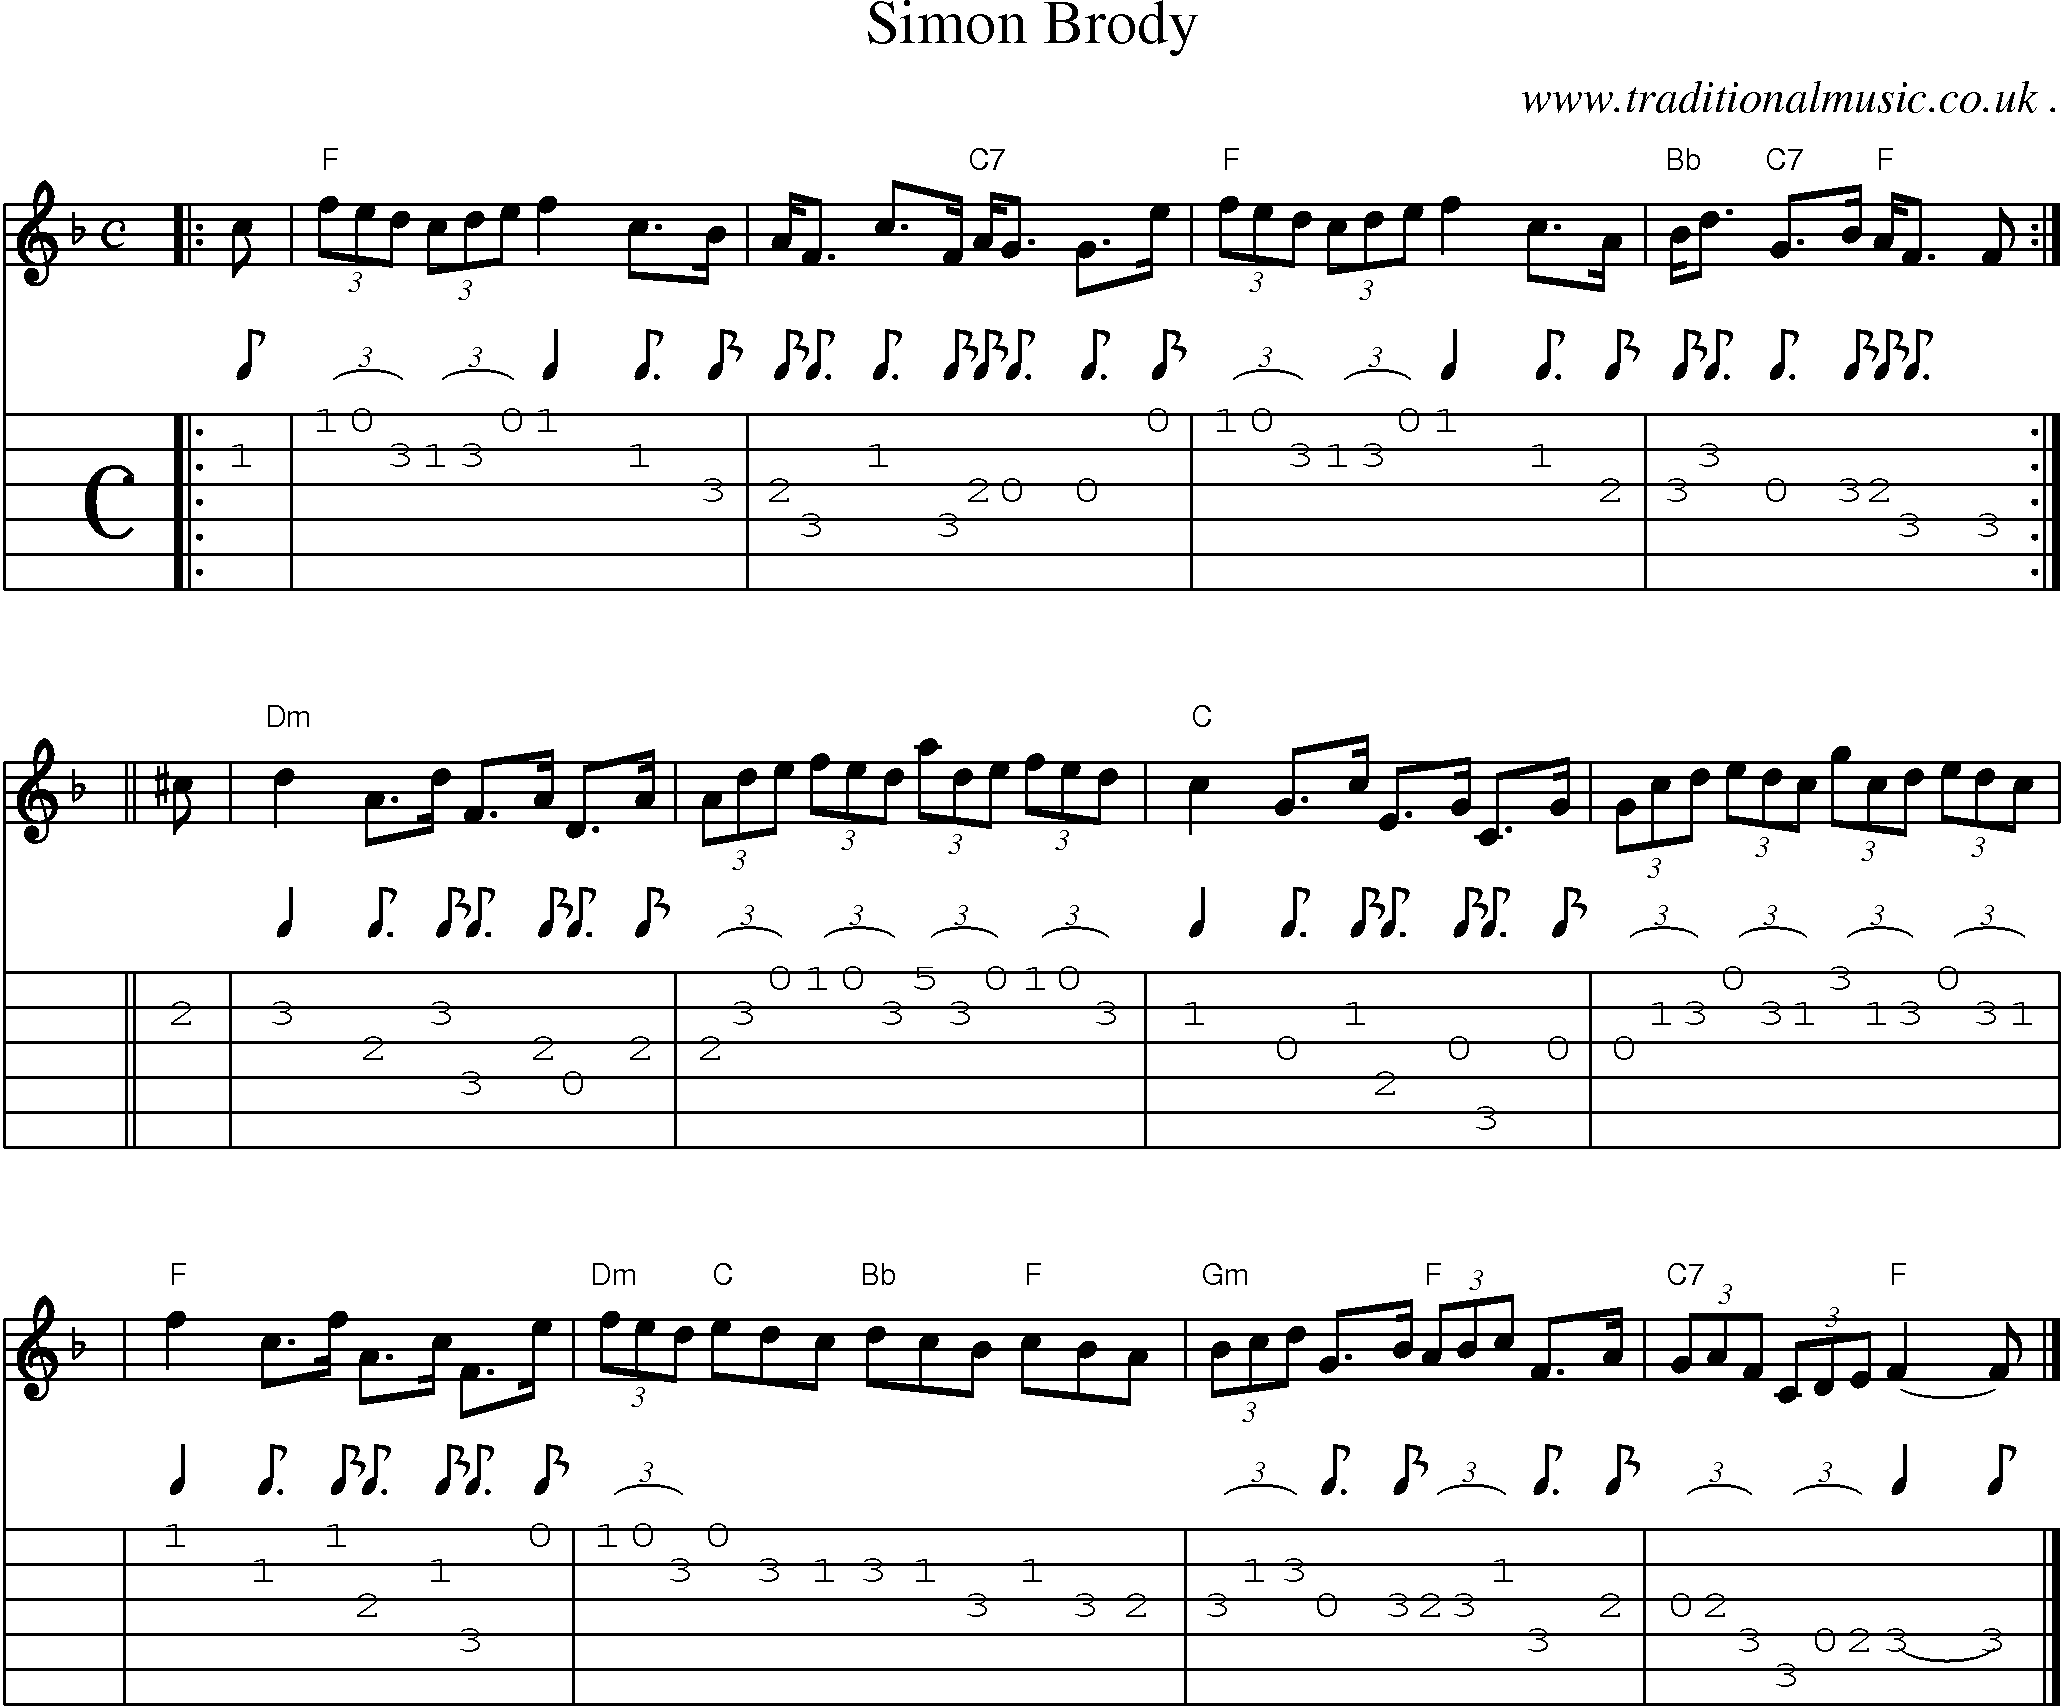 Sheet-music  score, Chords and Guitar Tabs for Simon Brody